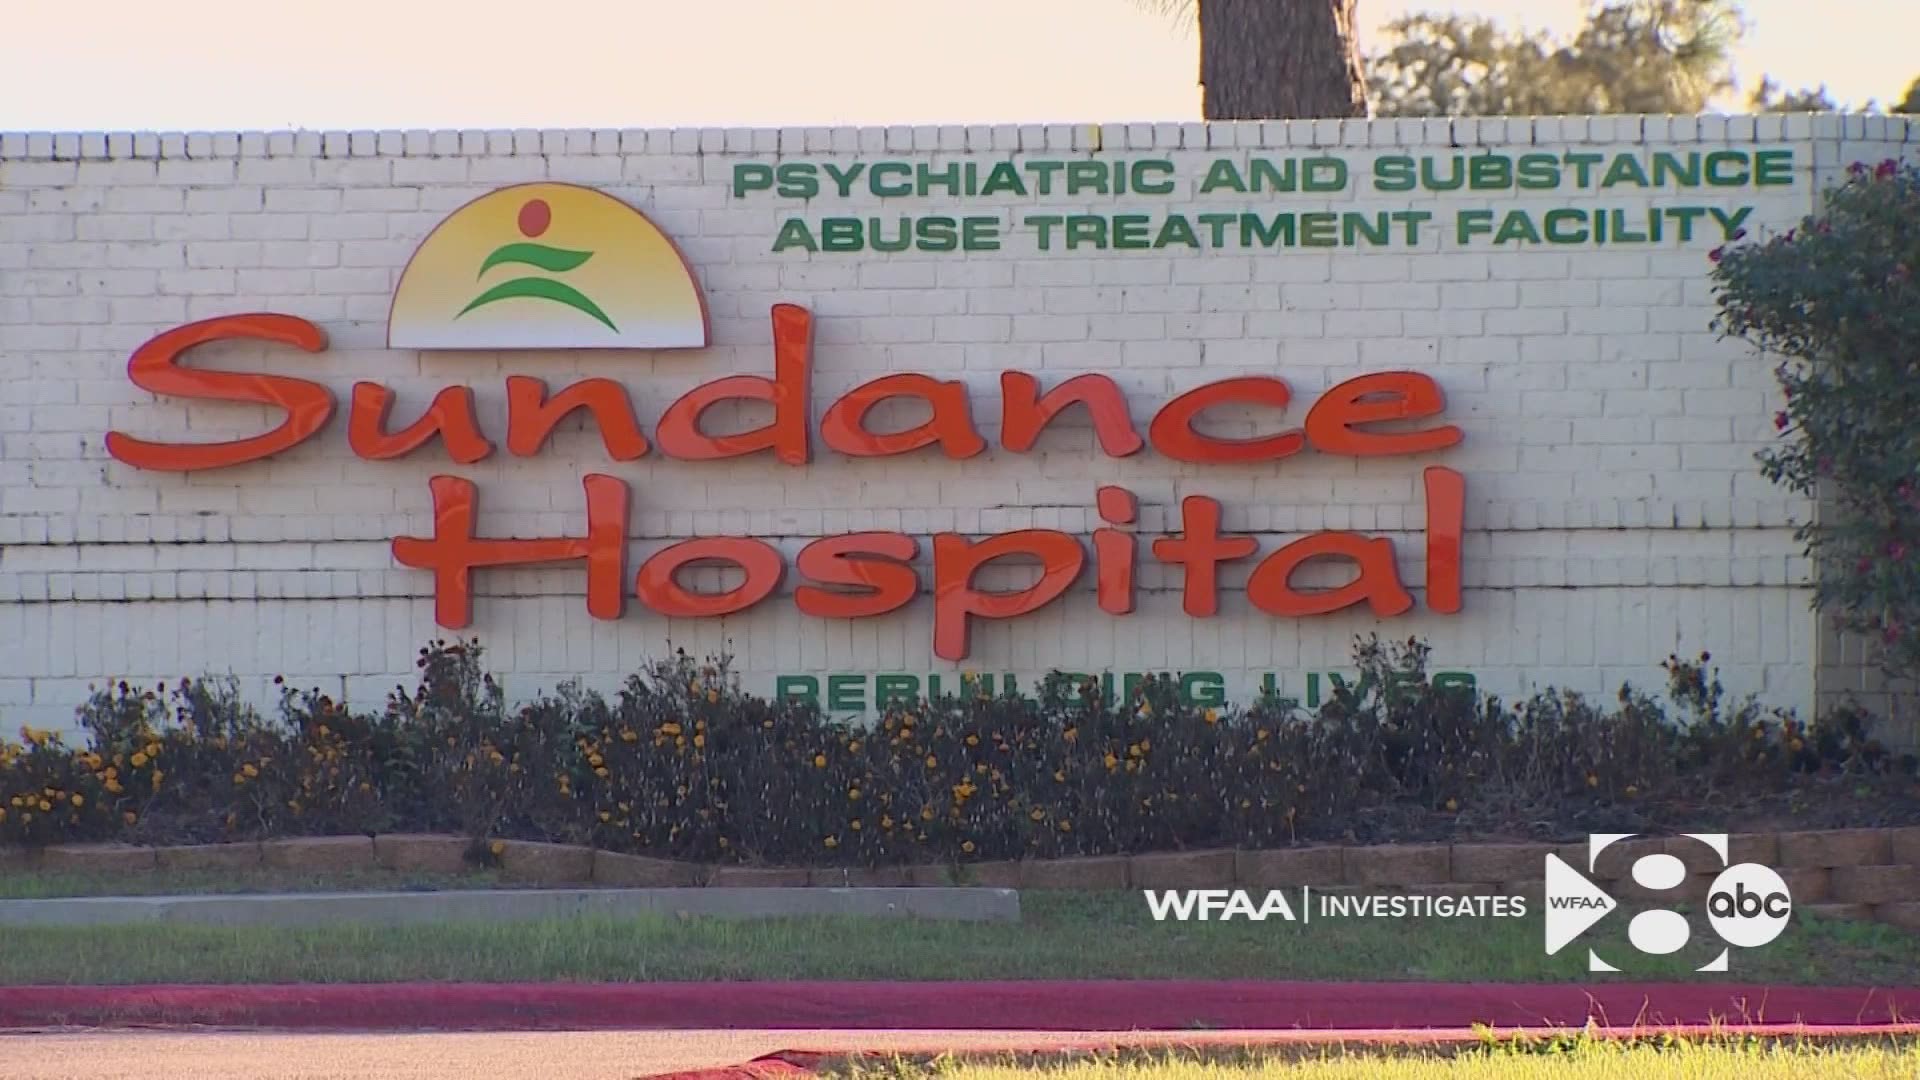 Three years after WFAA investigation, recent complaints show that some private psychiatric facilities continue to hold voluntary patients against their will.